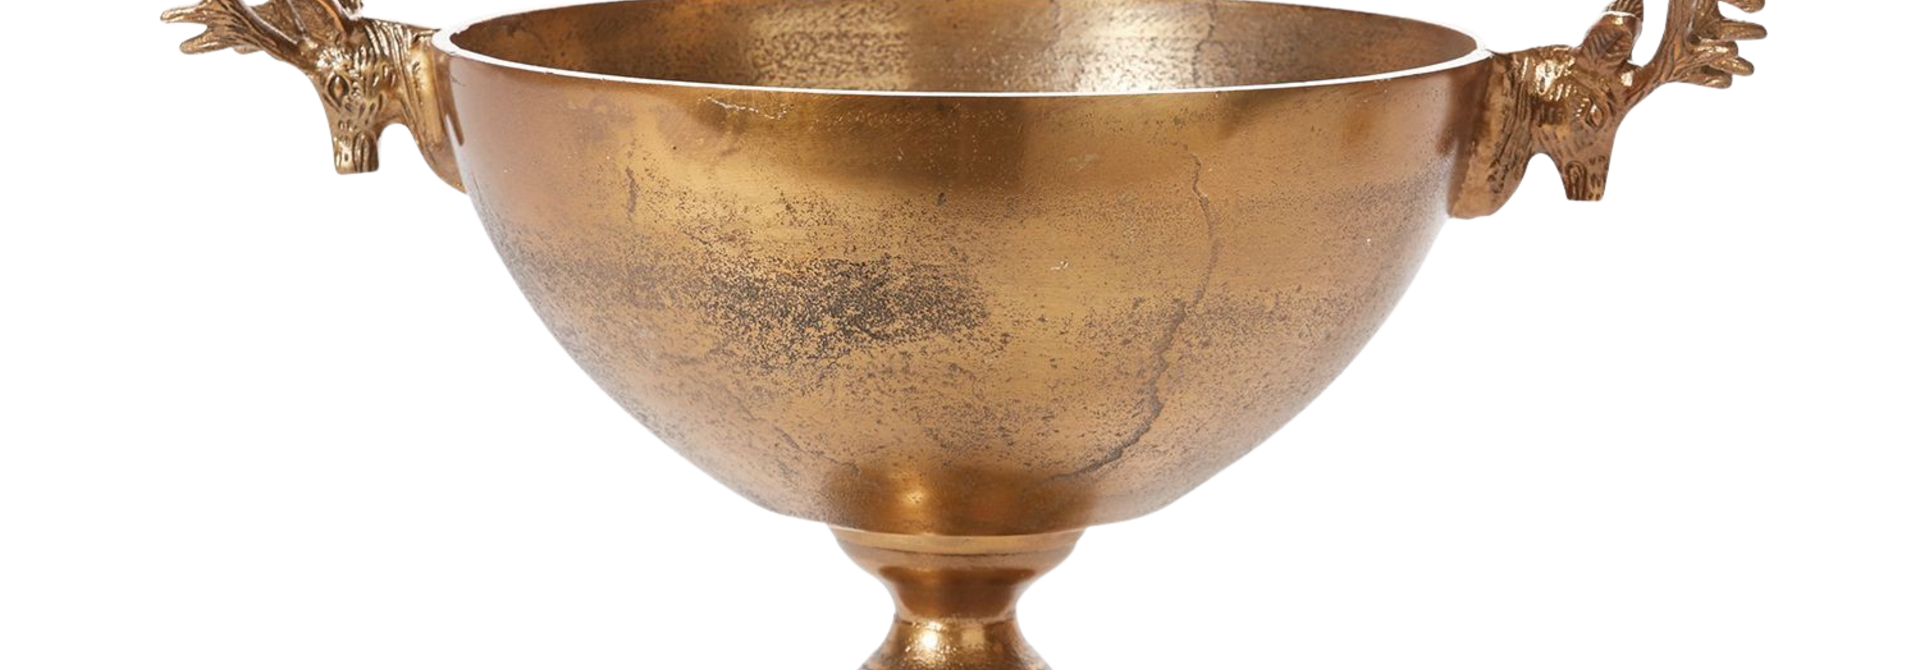 Buck Chalice | The Bowl Collection, Antique Gold - 19 Inch x 12.25 Inch x 10 Inch